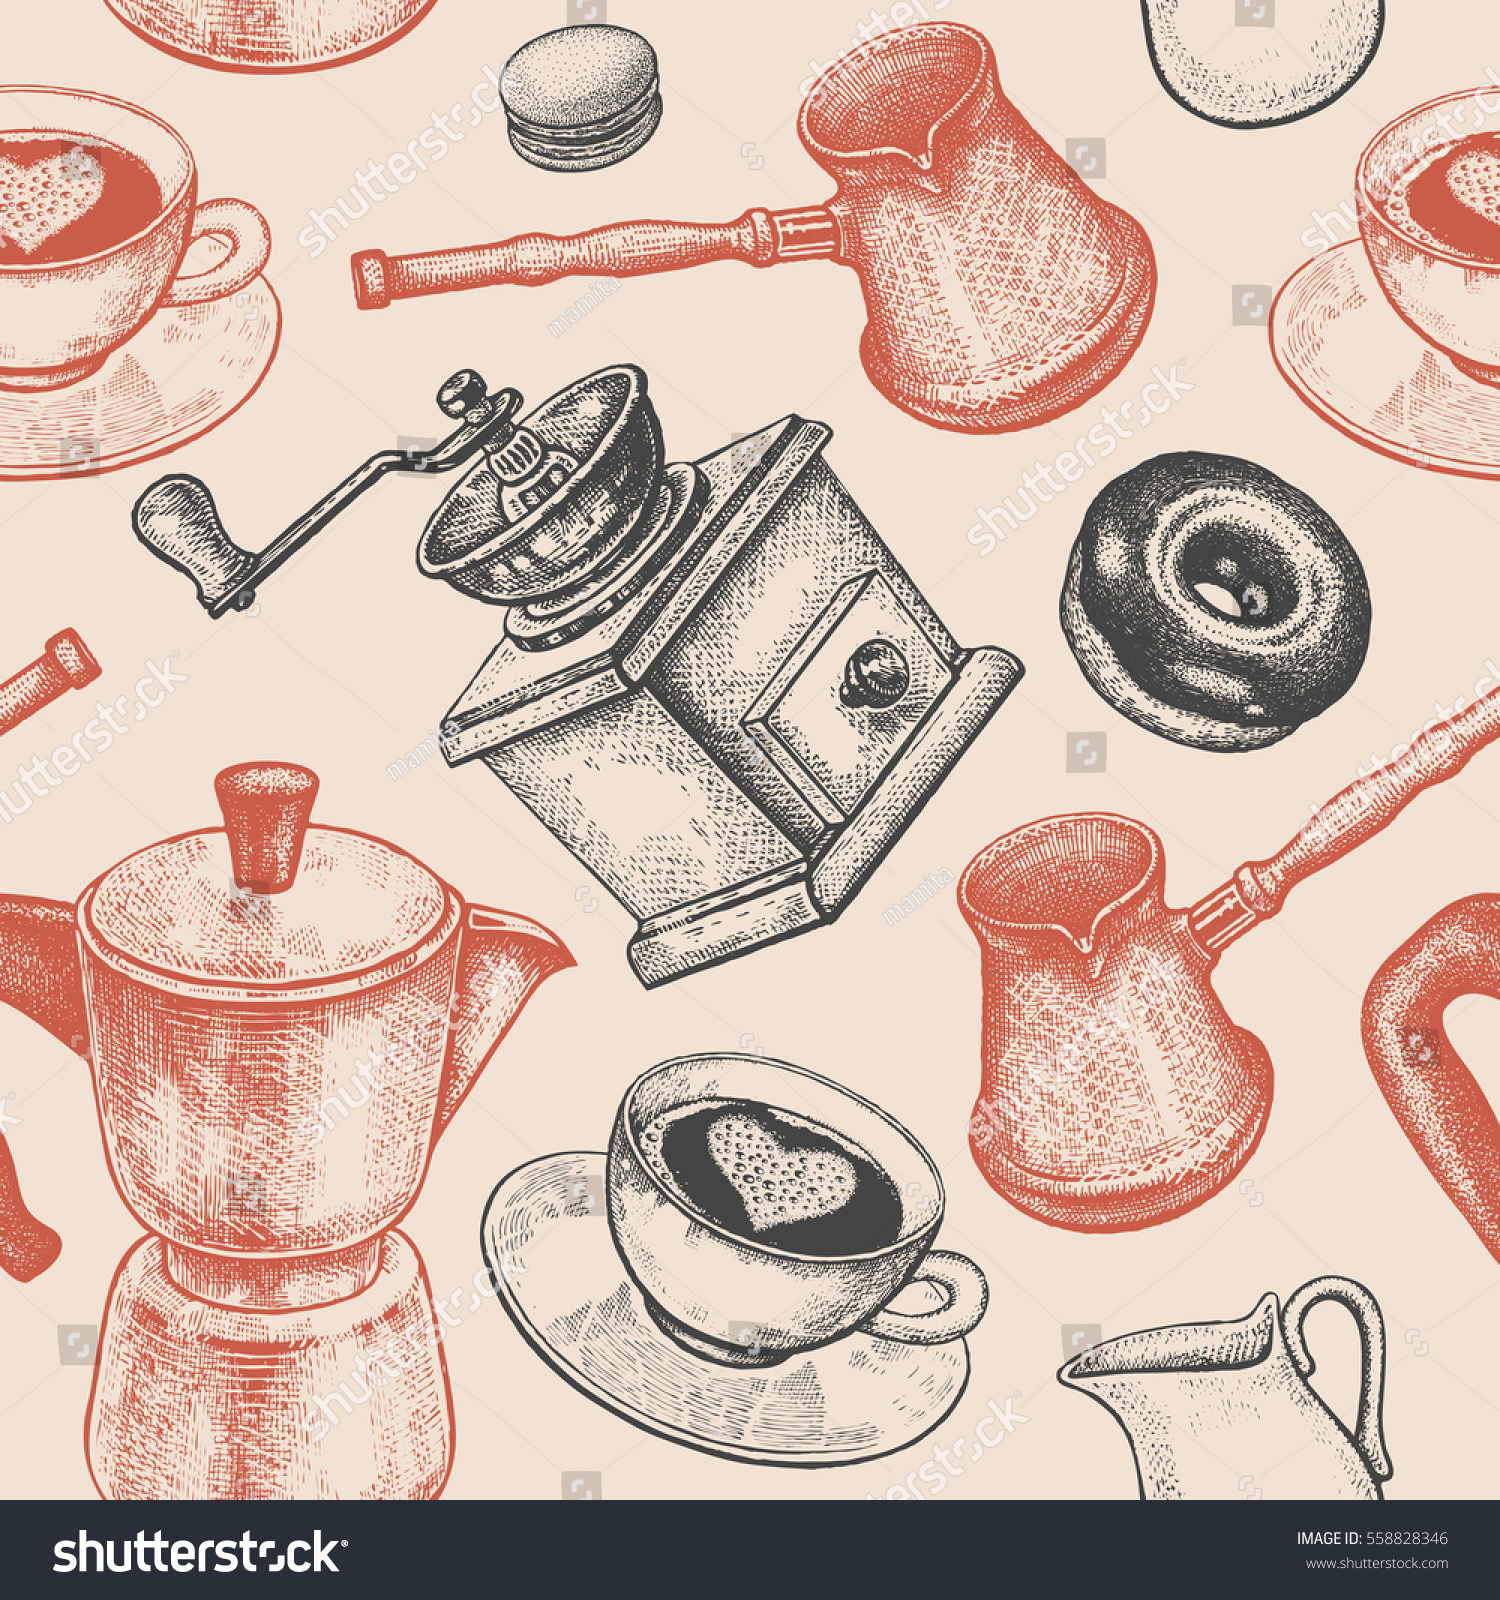 SVG of Coffee pot, coffee grinder, coffee cups, donuts, Turkish ibrik, jug of milk. Seamless vector pattern. Art illustration. Vintage background. Kitchen design for textiles, paper, packaging, wrapping. svg